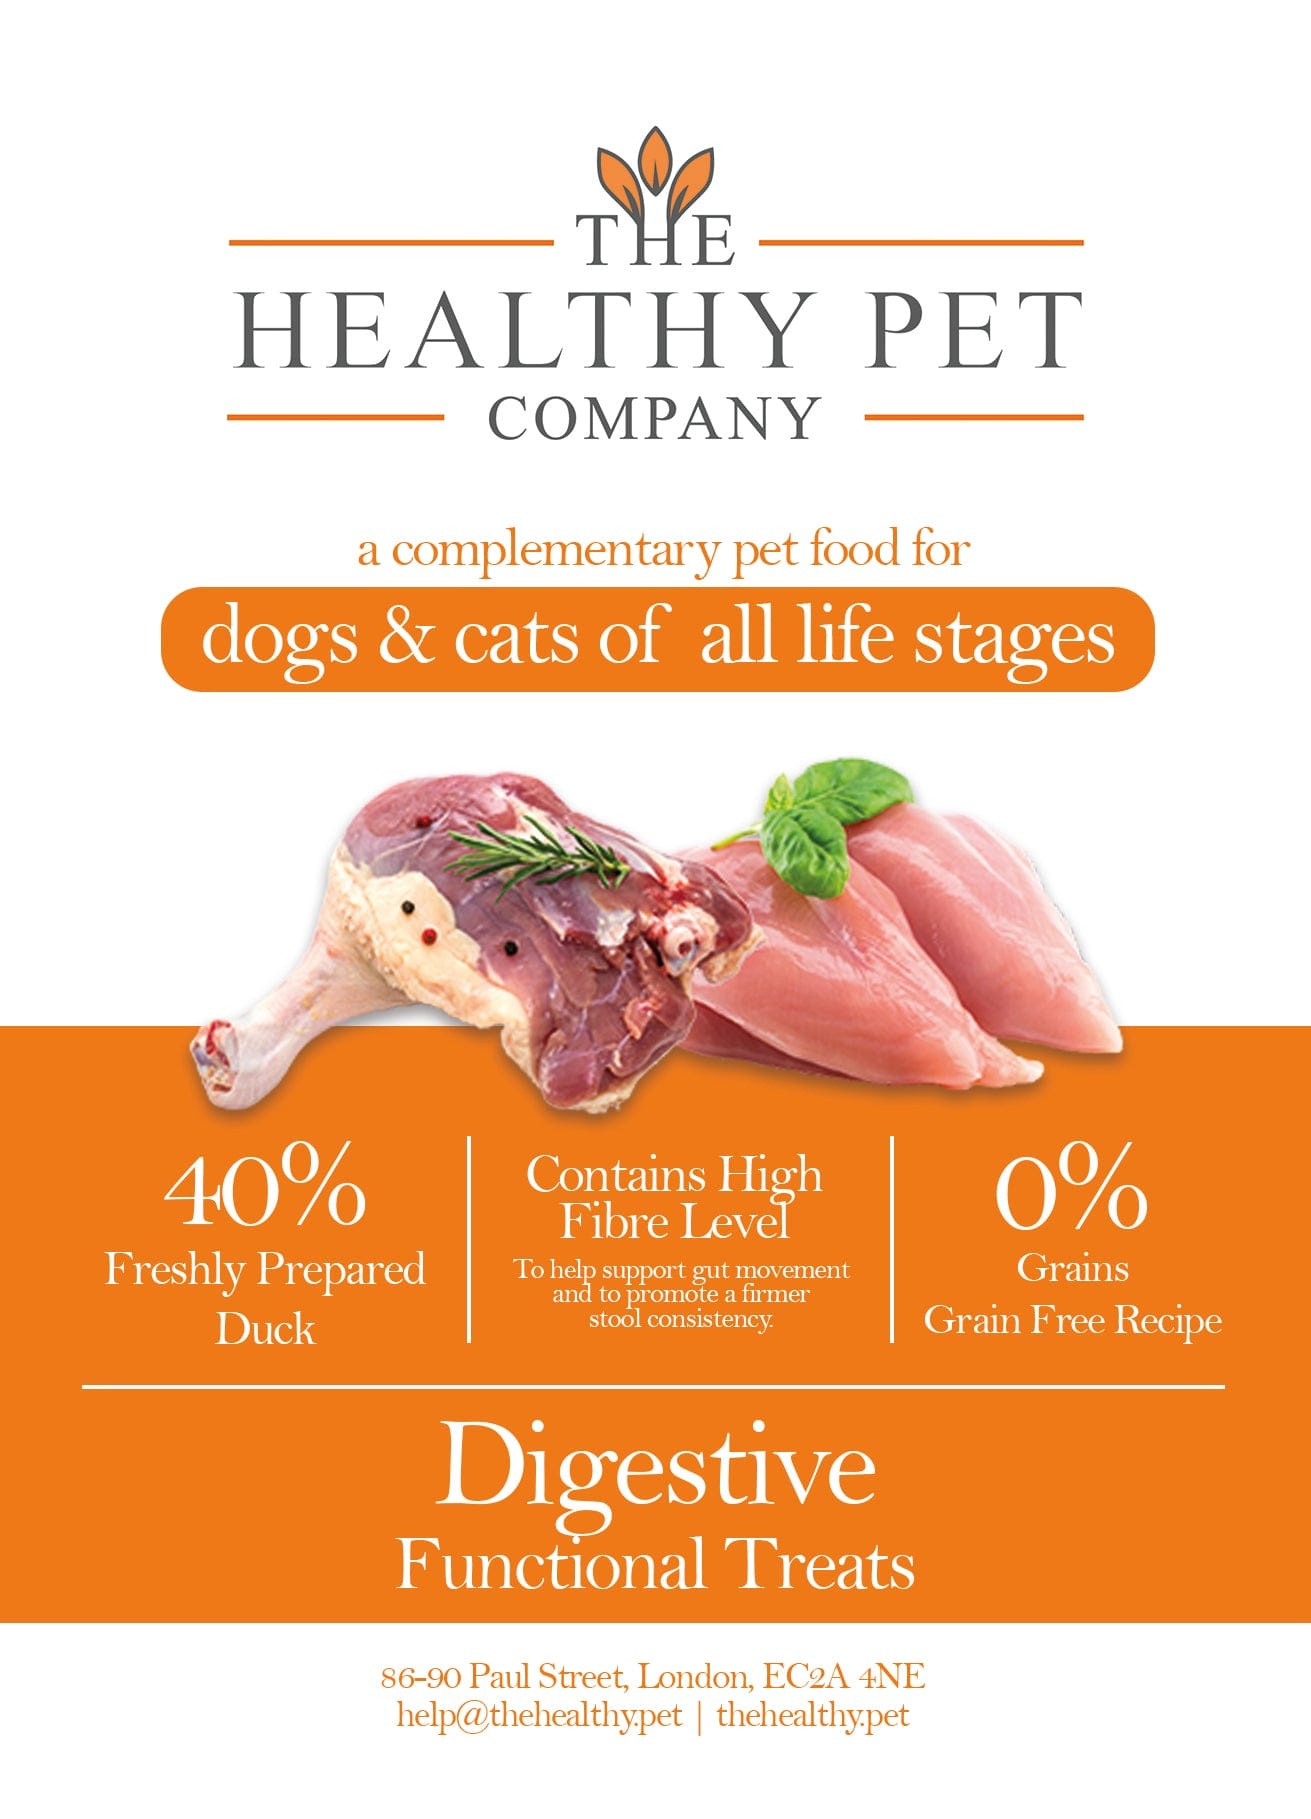 The Healthy Pet Company Natural Digestion Support Functional Treats - The Healthy Pet Company